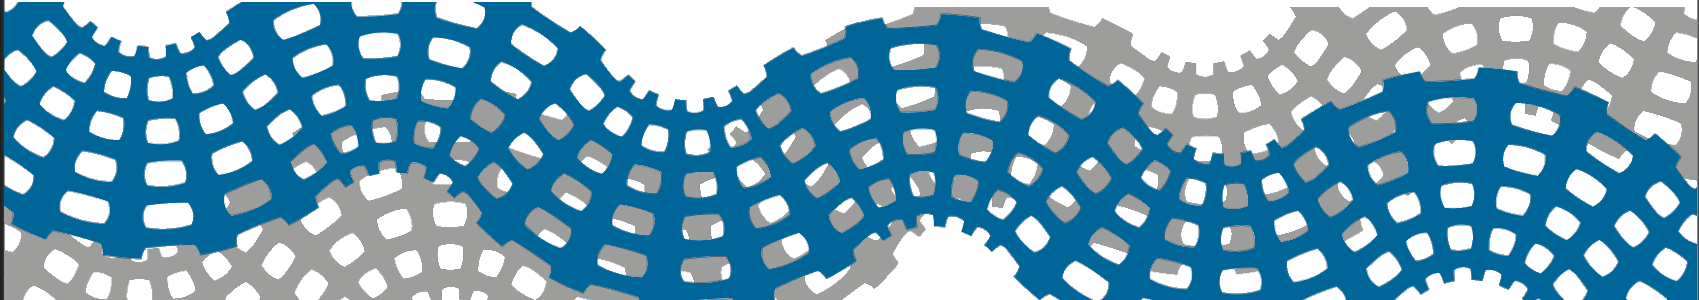 Symbolic representation of two microstructures in the colors blue and gray